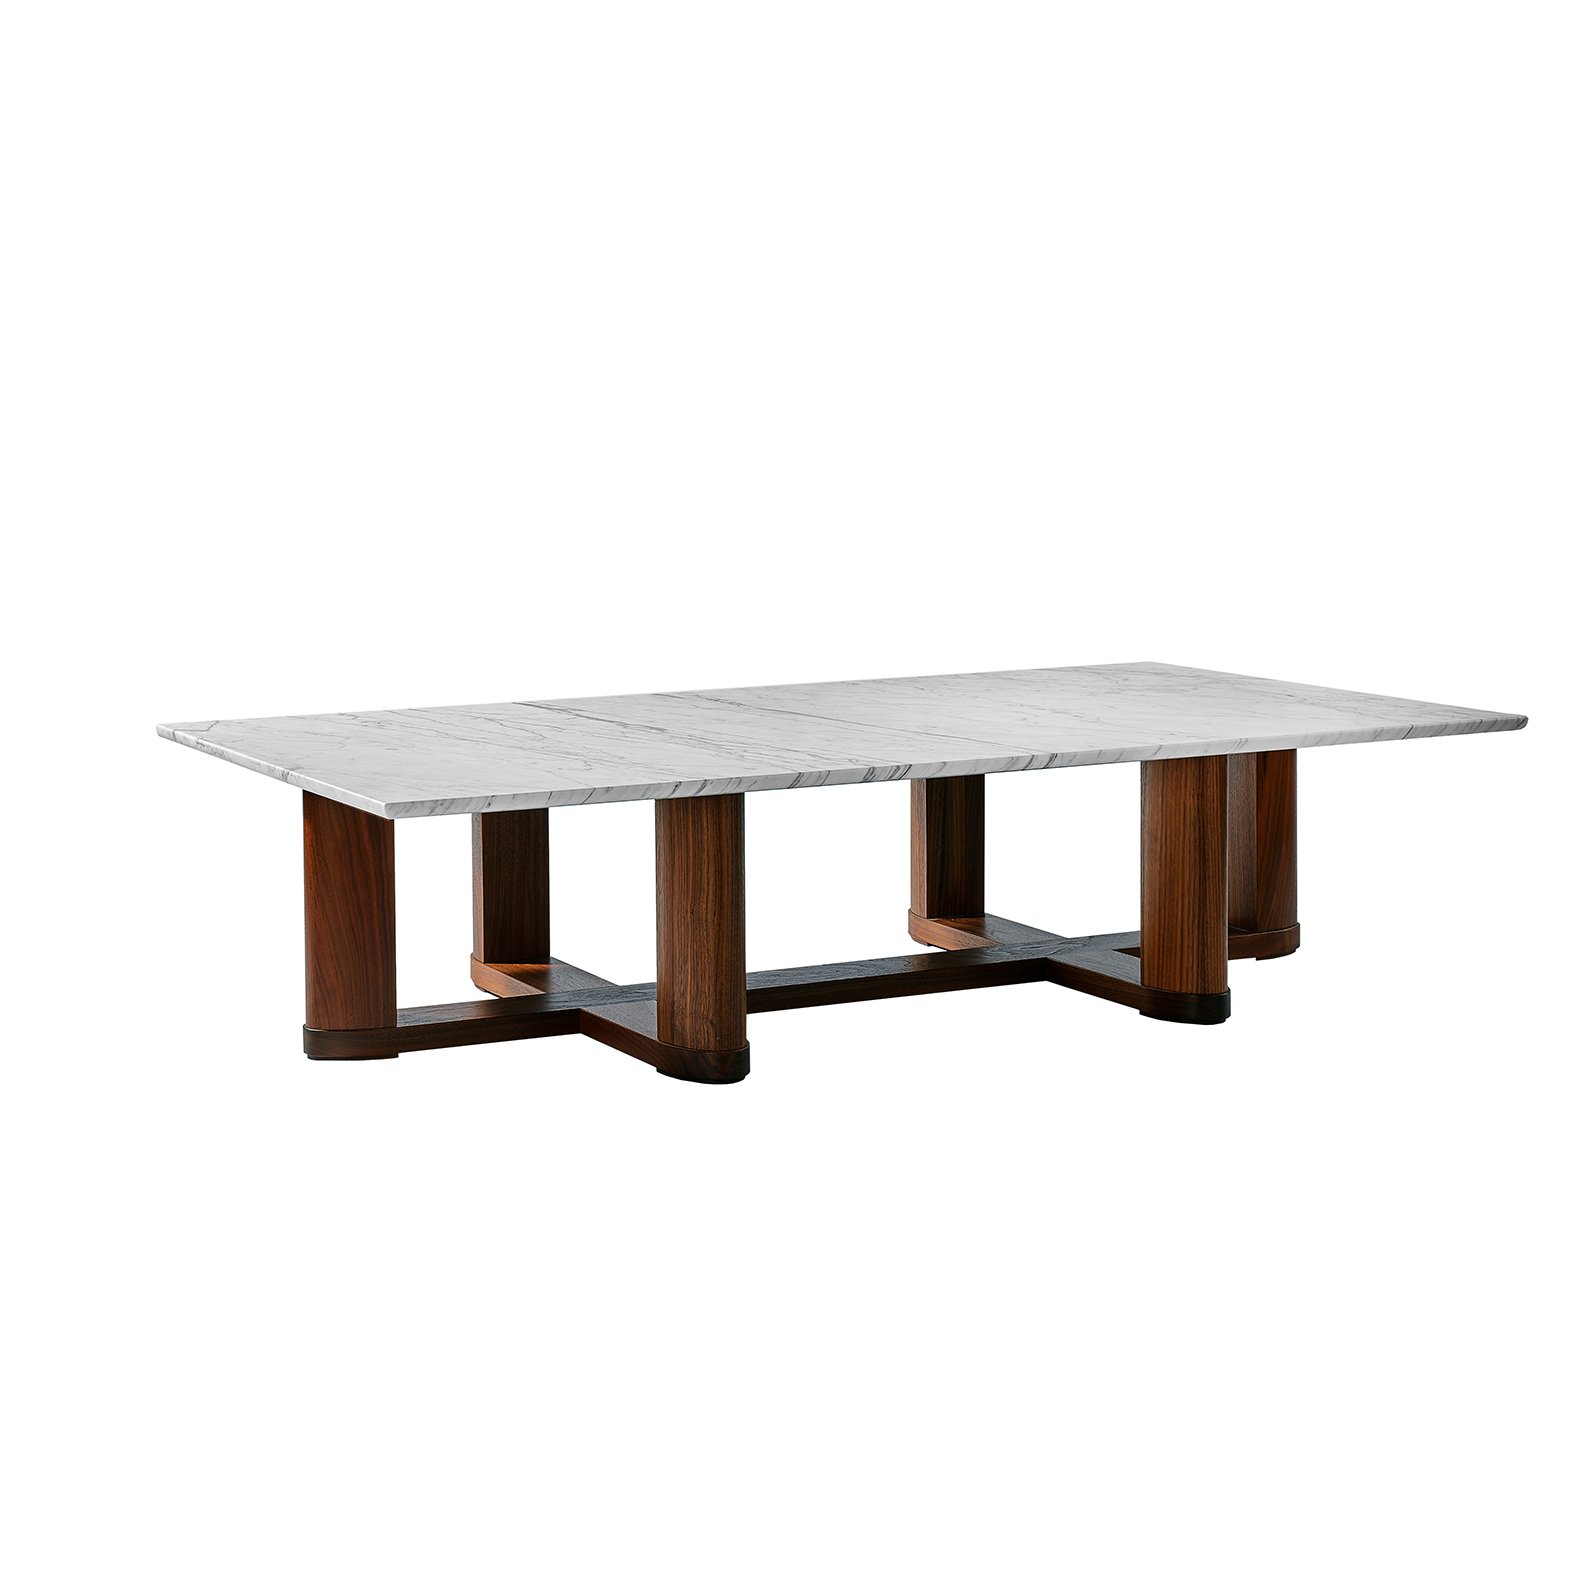 HULL COFFEE TABLE - RECTANGLE - $5,985